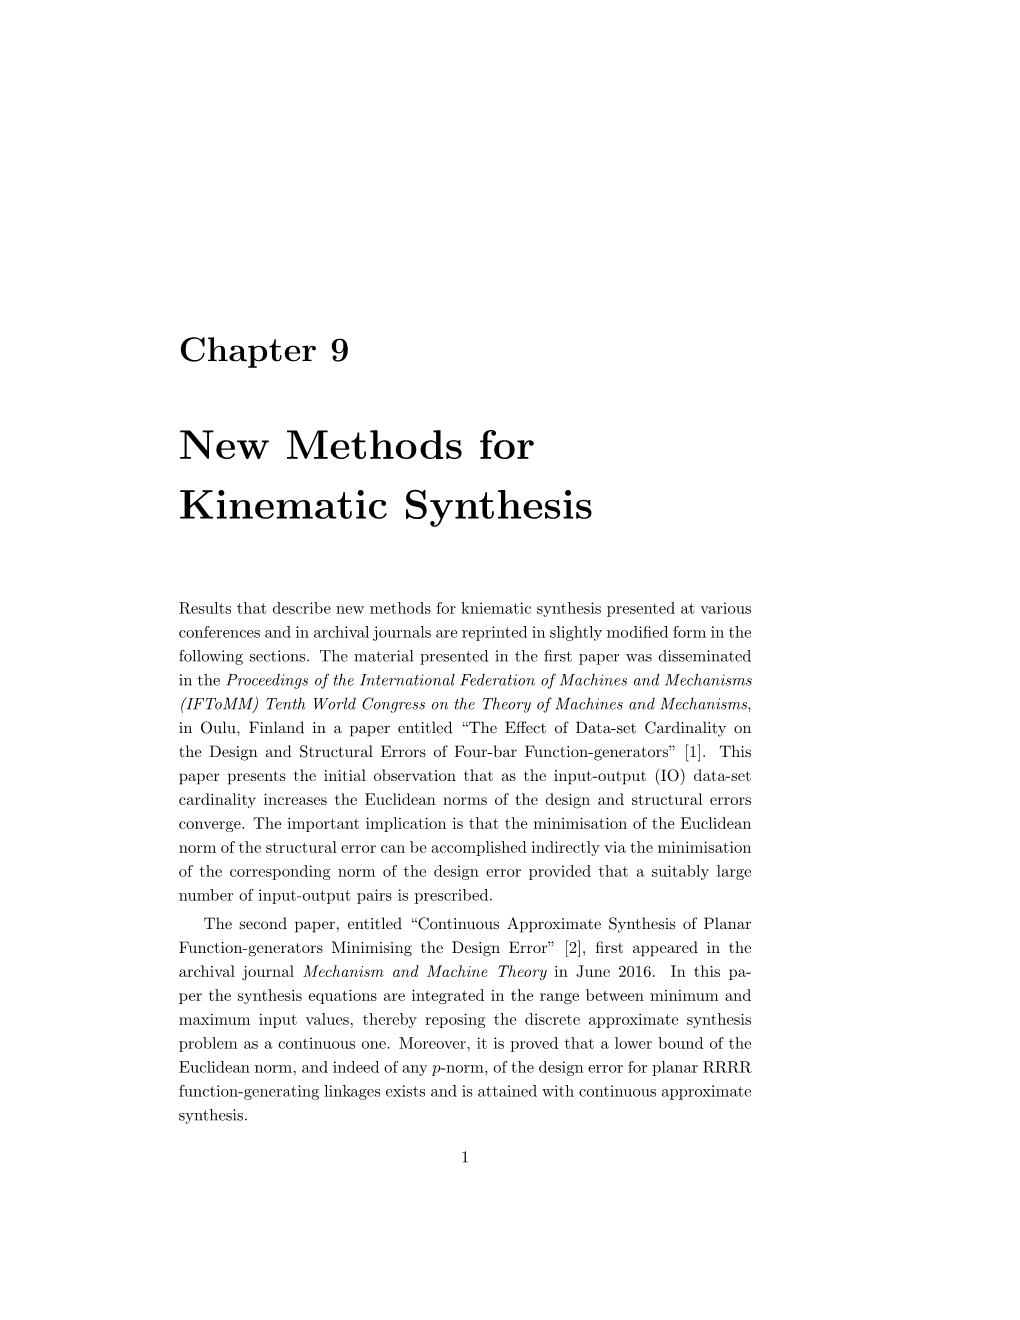 Chapter 8, New Methods for Kinematic Synthesis